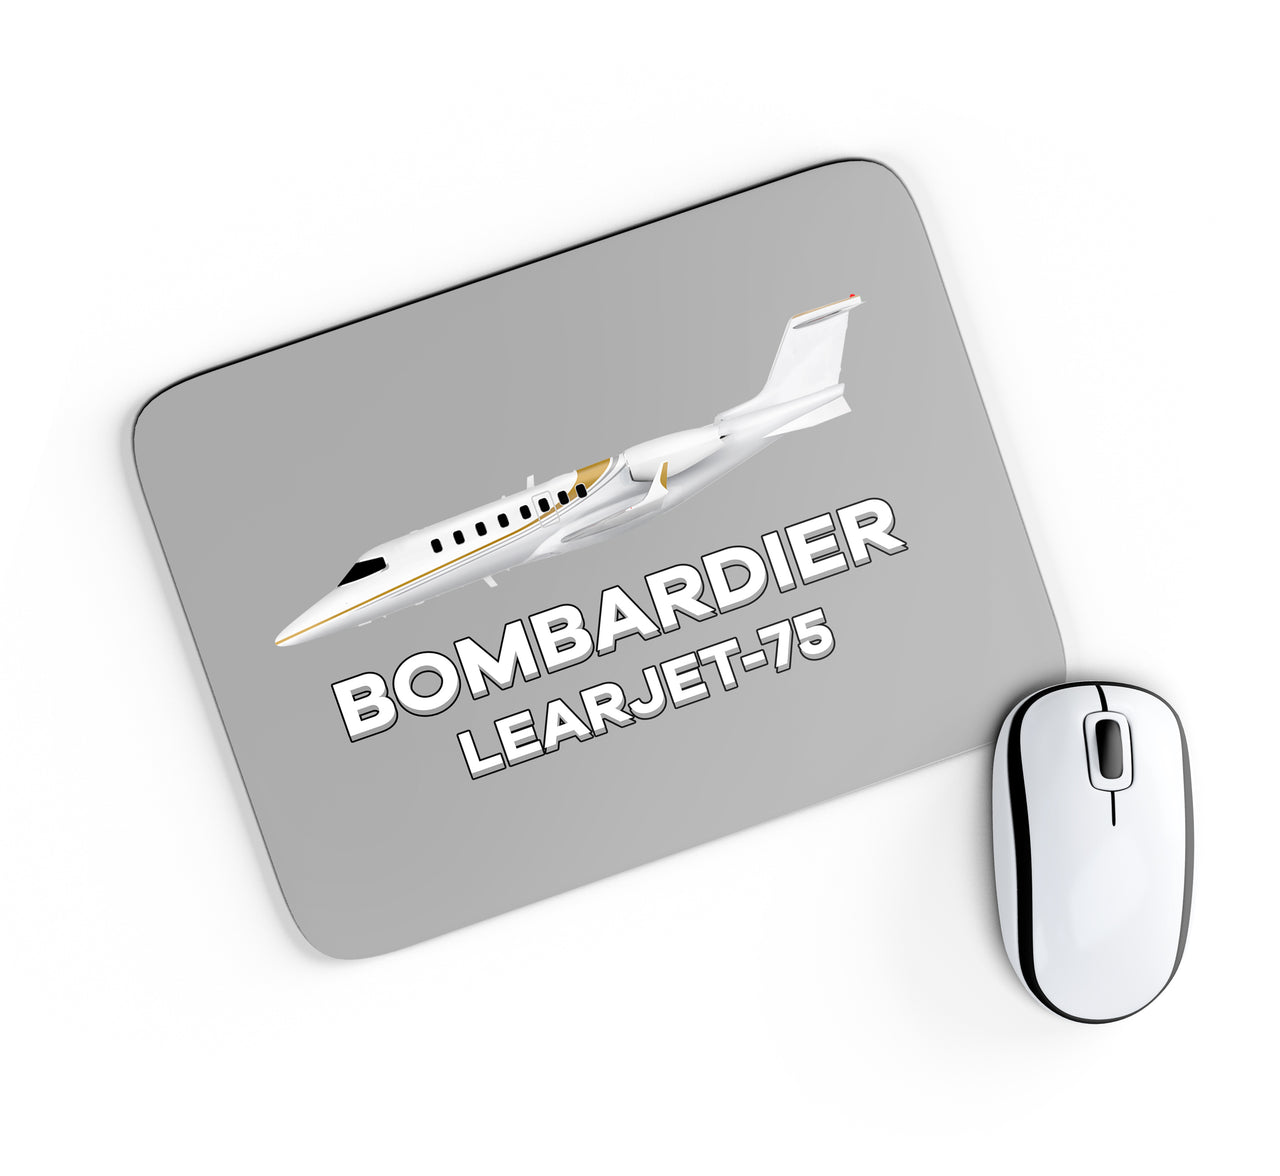 The Bombardier Learjet 75 Designed Mouse Pads